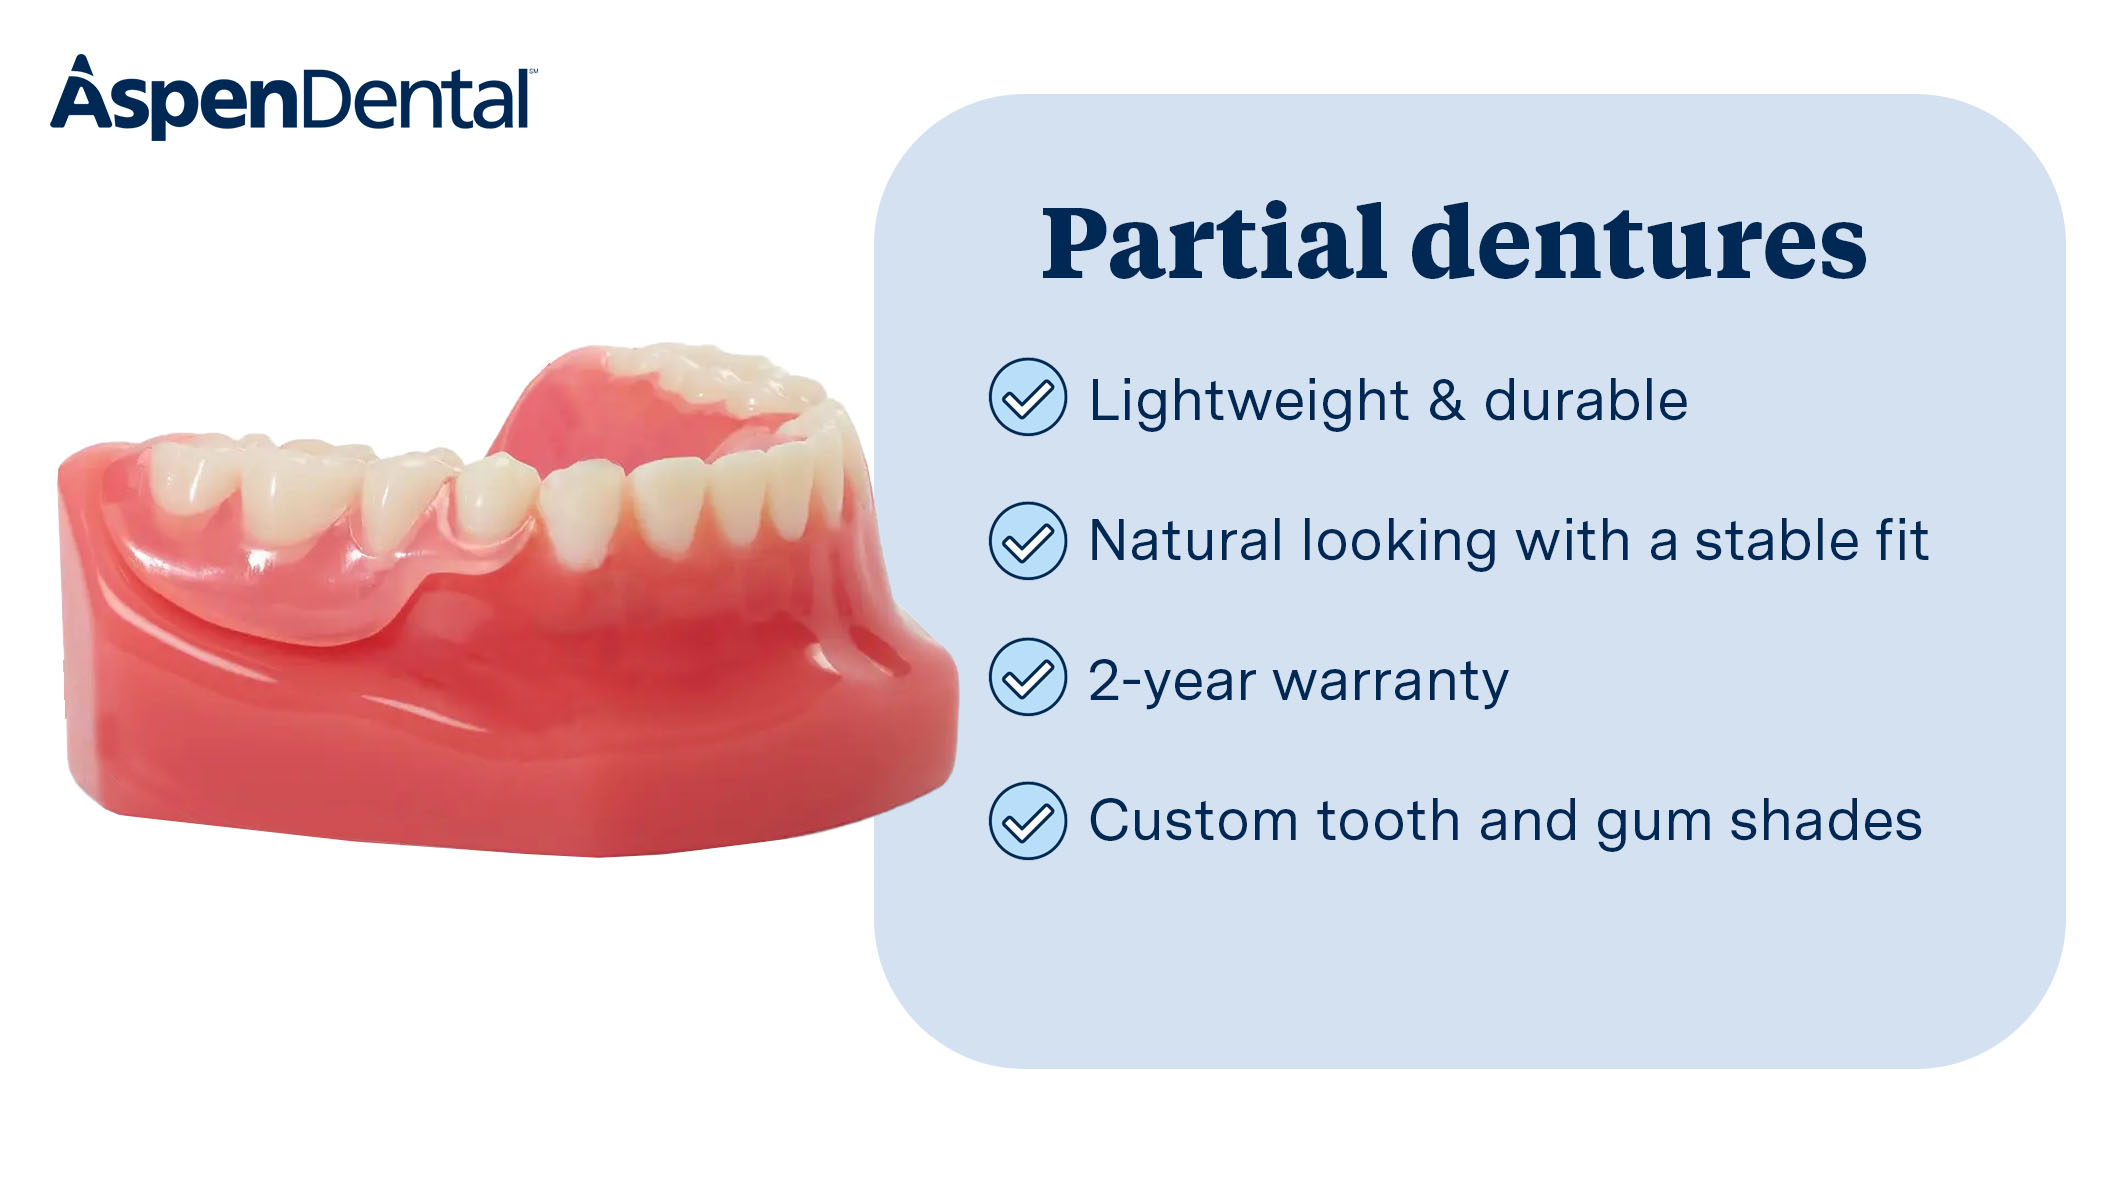 Restore your smile with our customizable partial dentures. Lightweight, durable, natural-looking, an Aspen Dental - Portage, MI Portage (269)329-7900